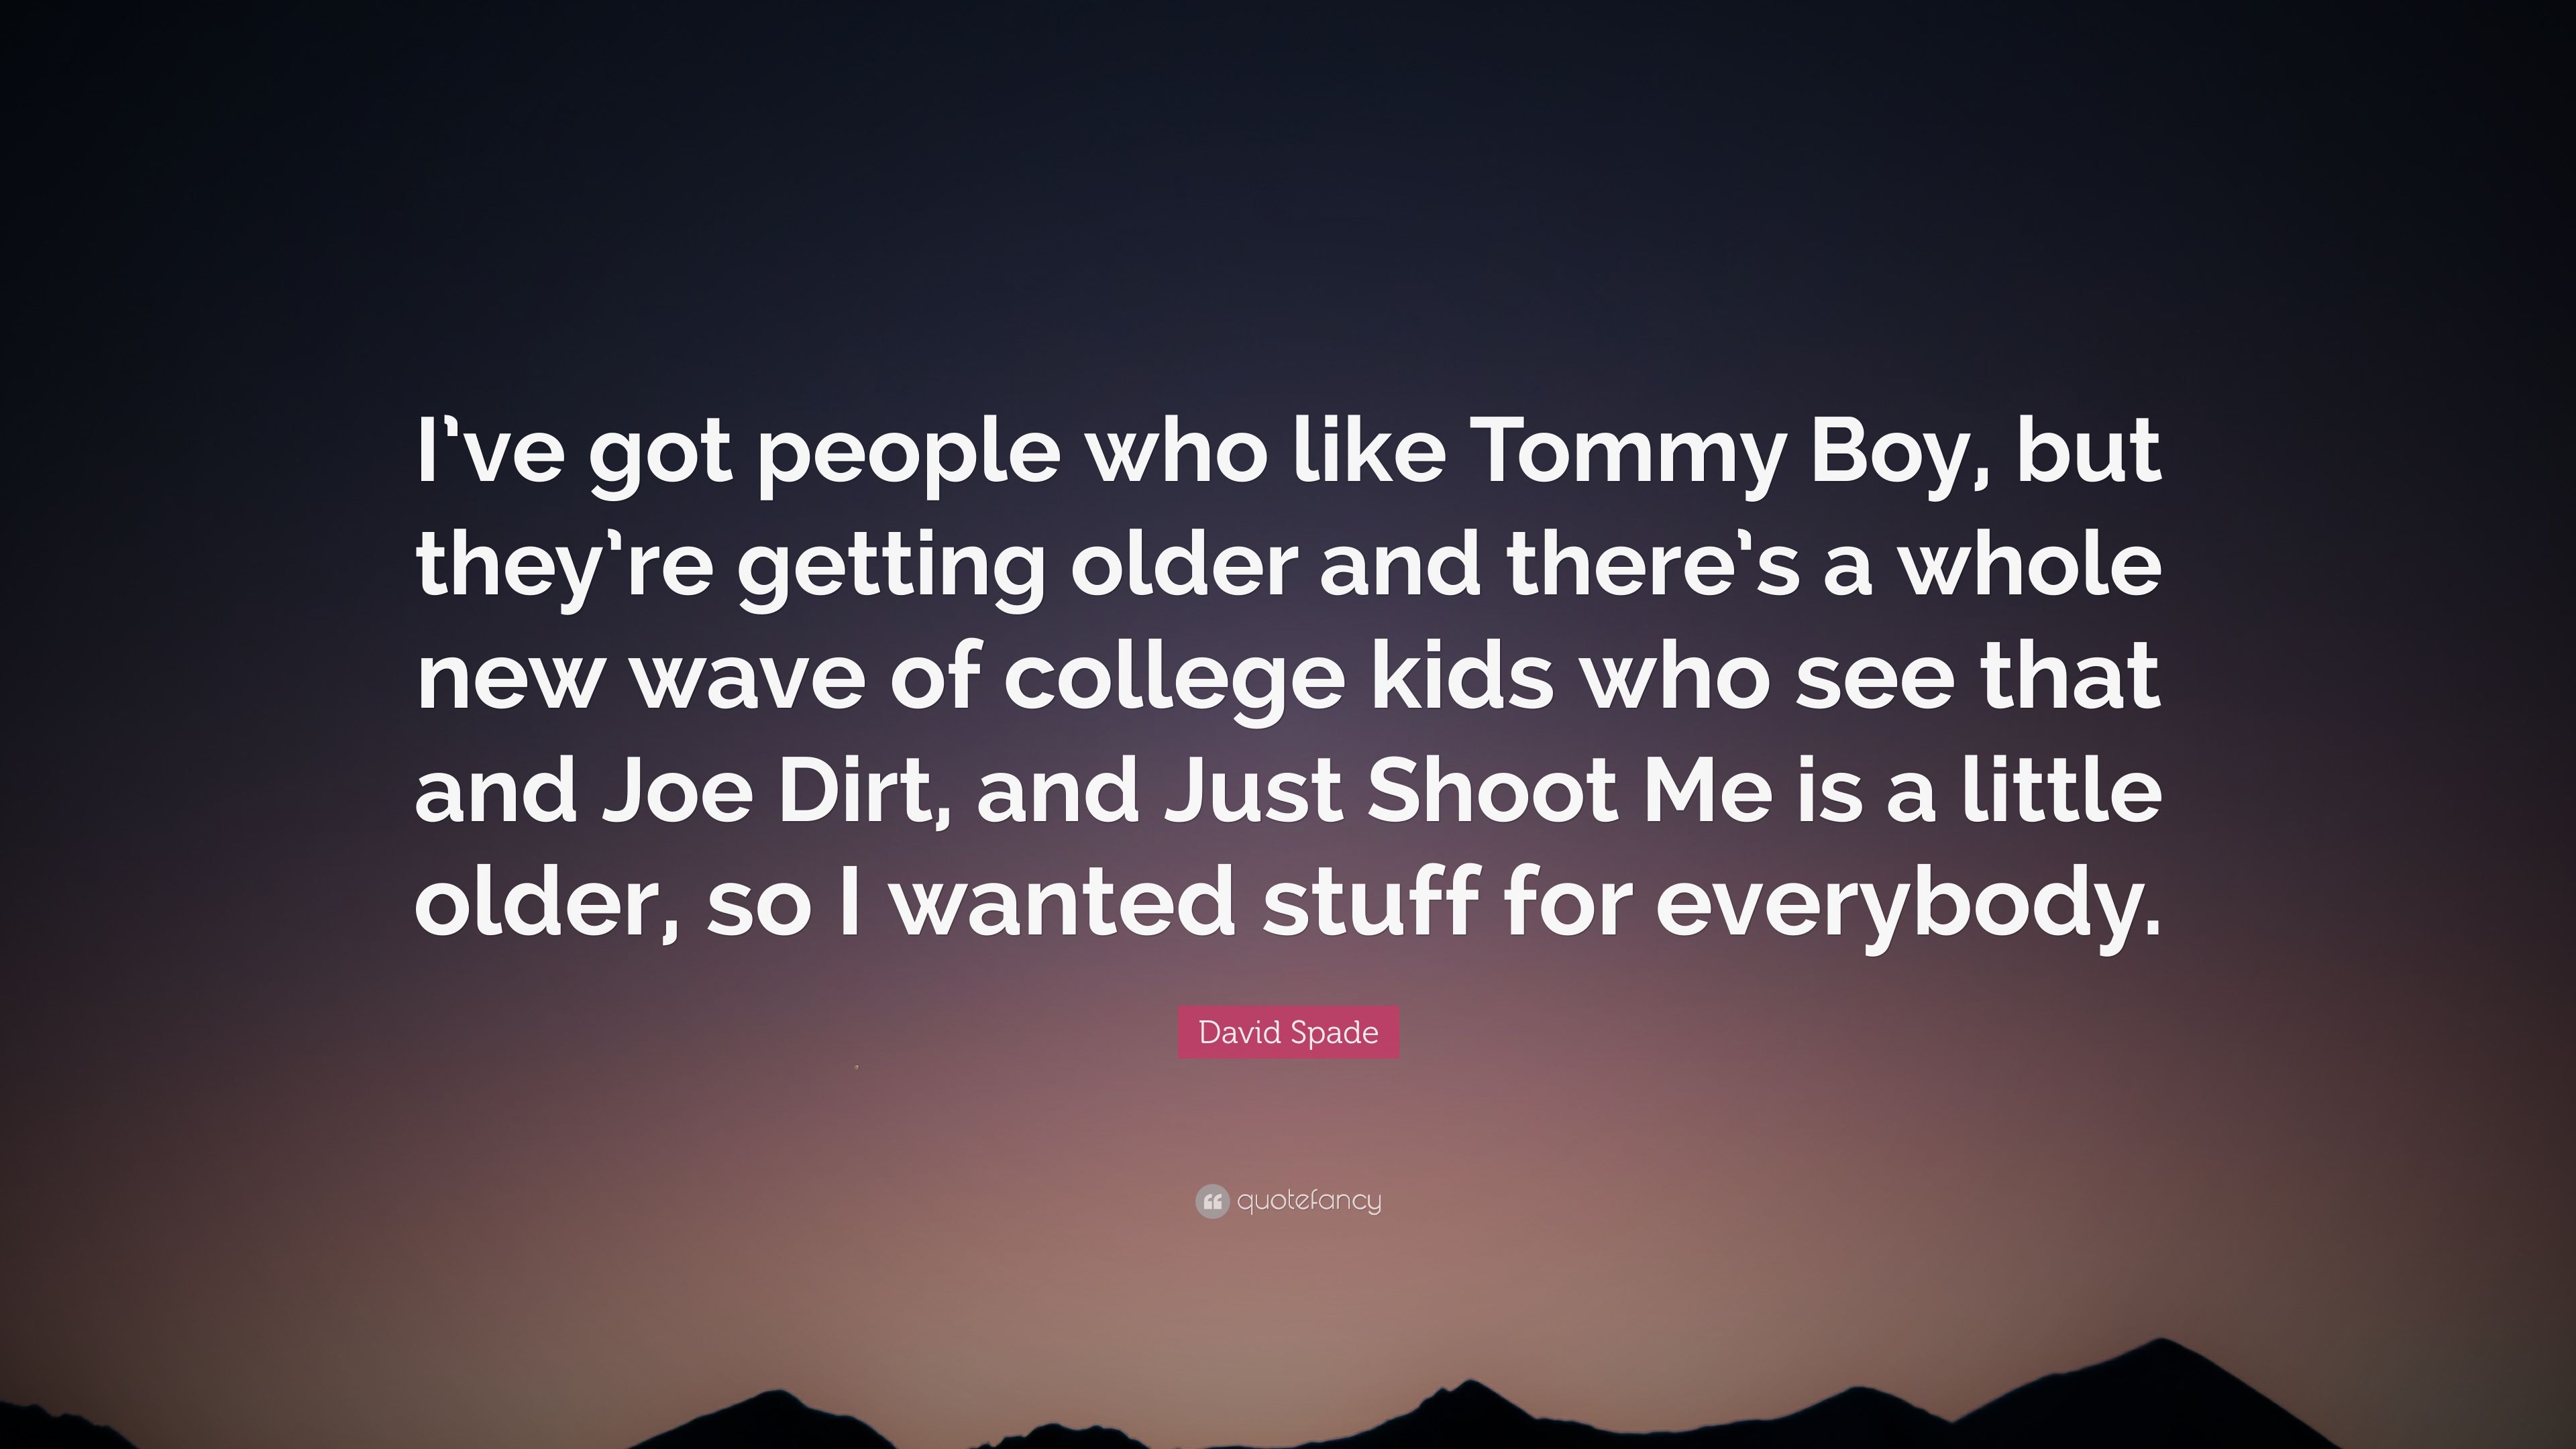 David Spade Quote: “I've got people who like Tommy Boy, but they